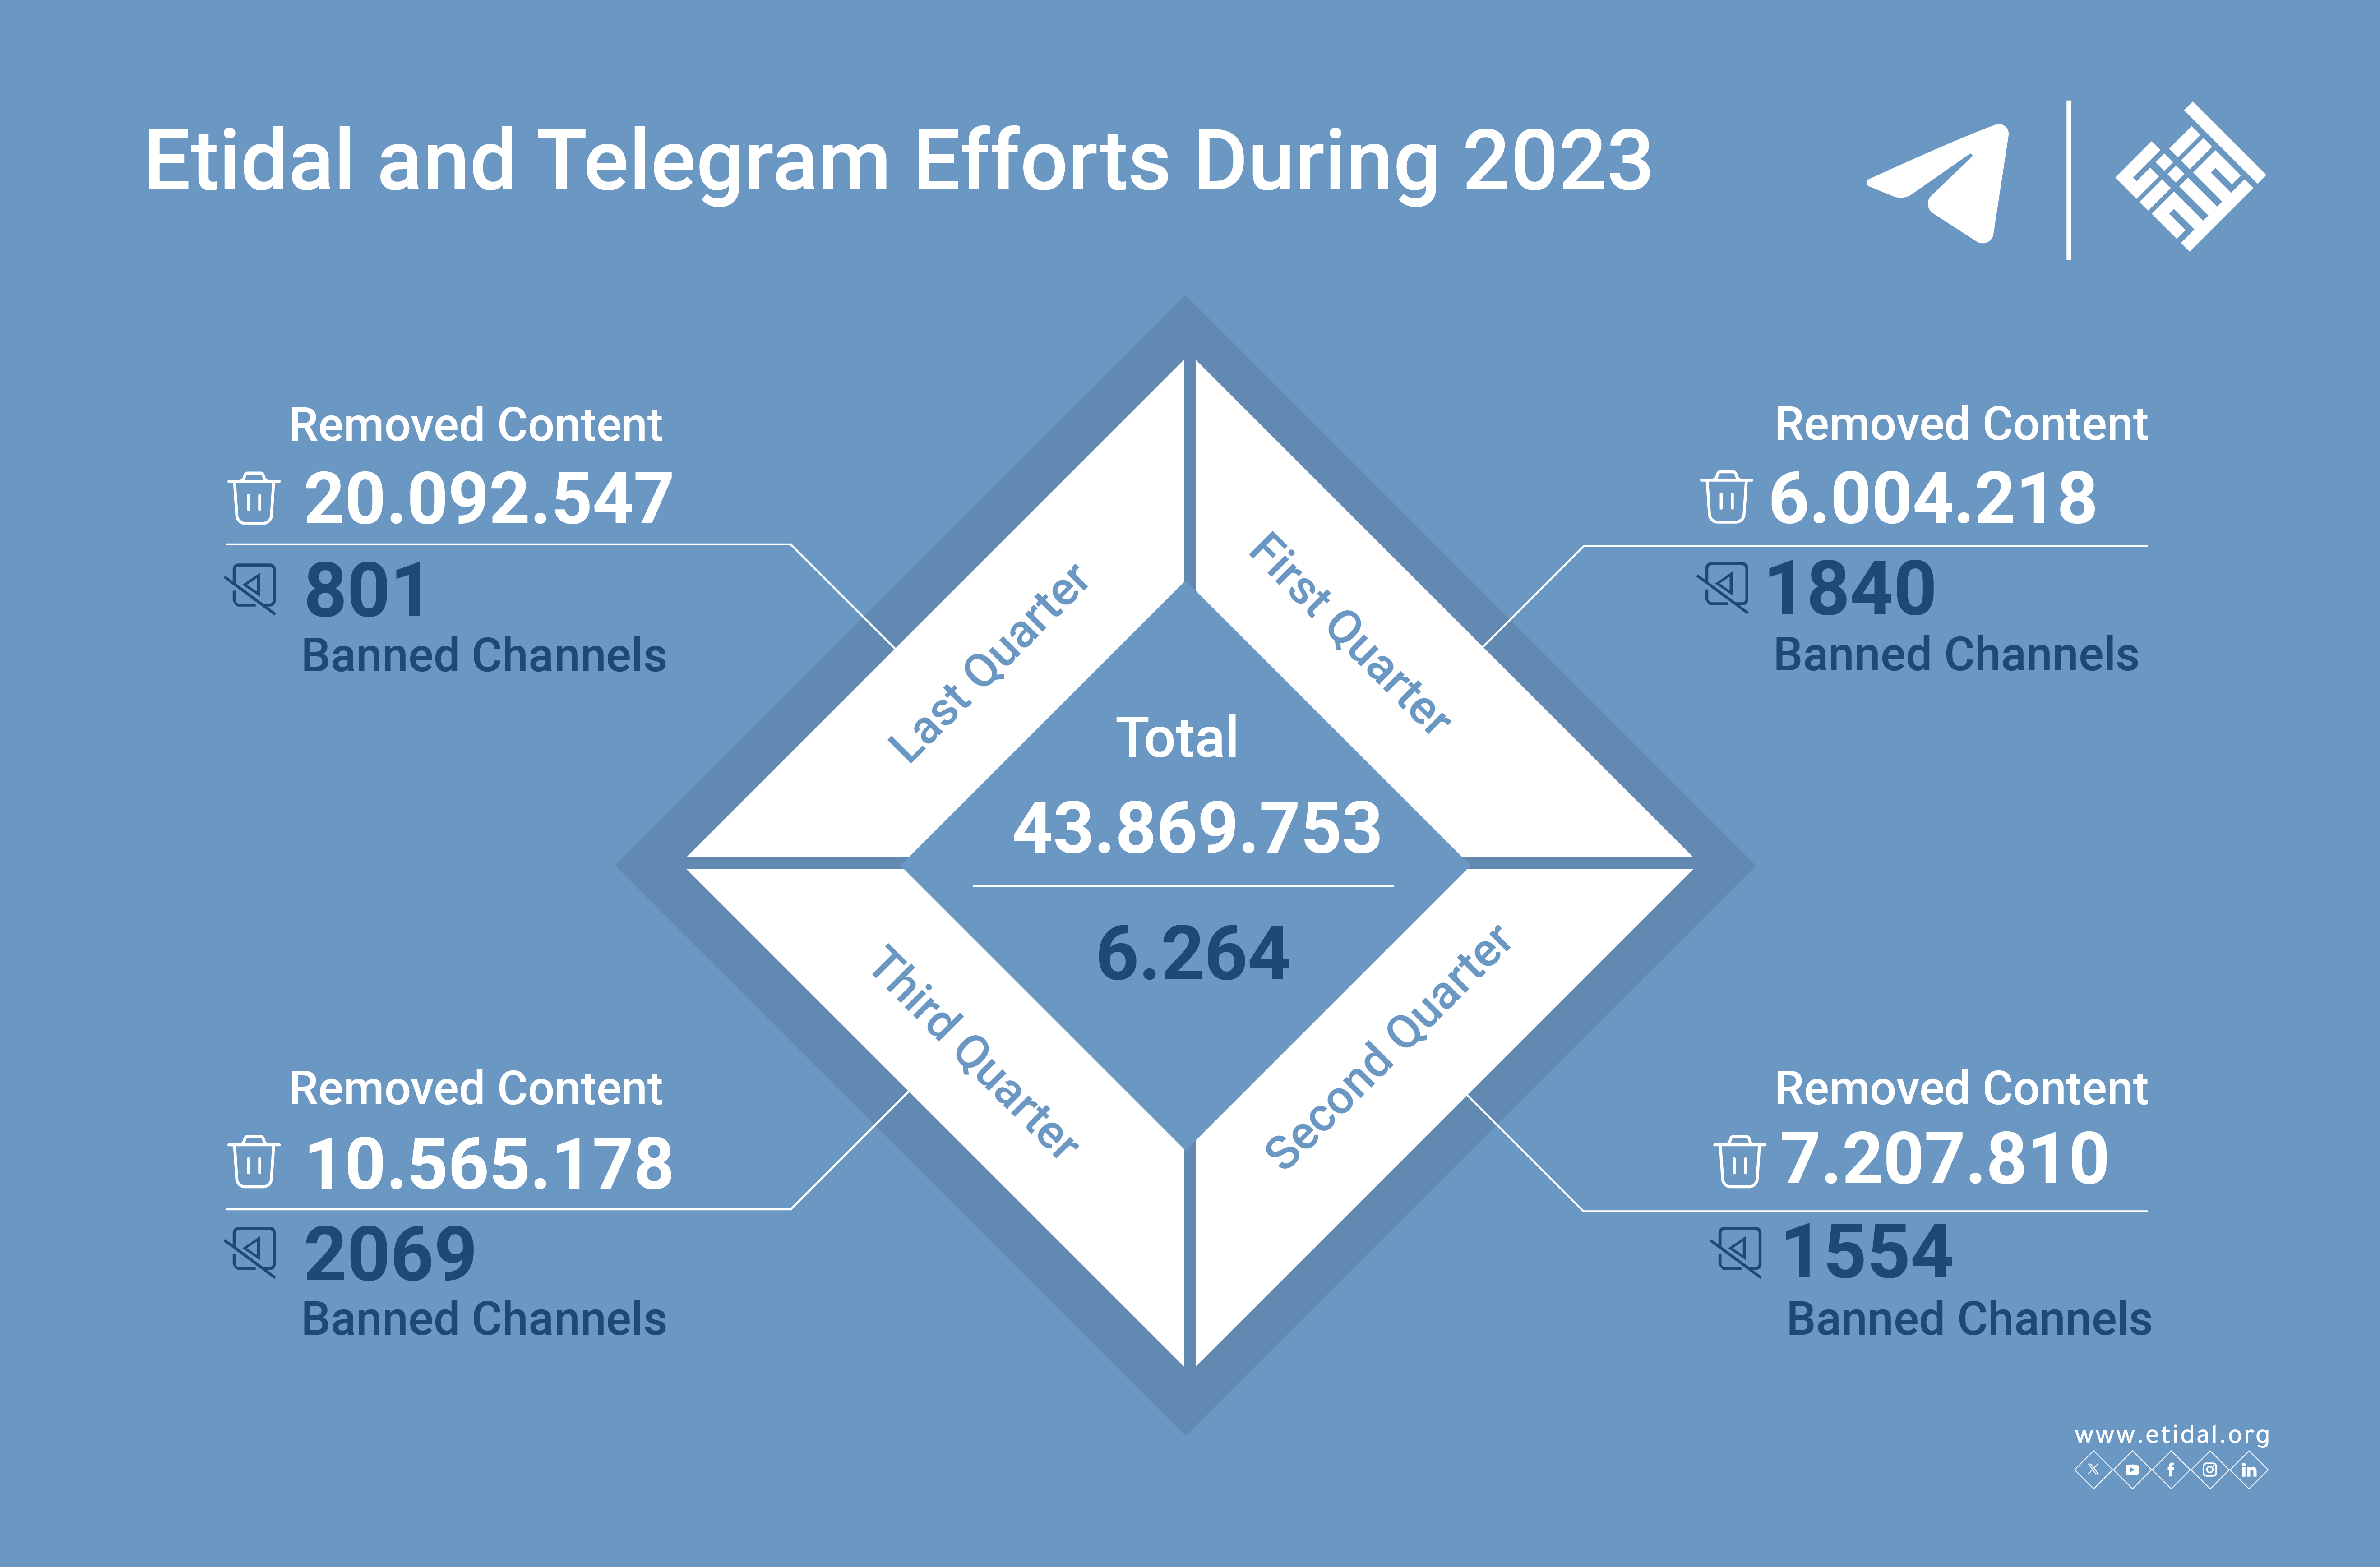 Etidal and Telegram Counter Three Terrorist Organizations by Removing 43 Million Extremist Content During 2023